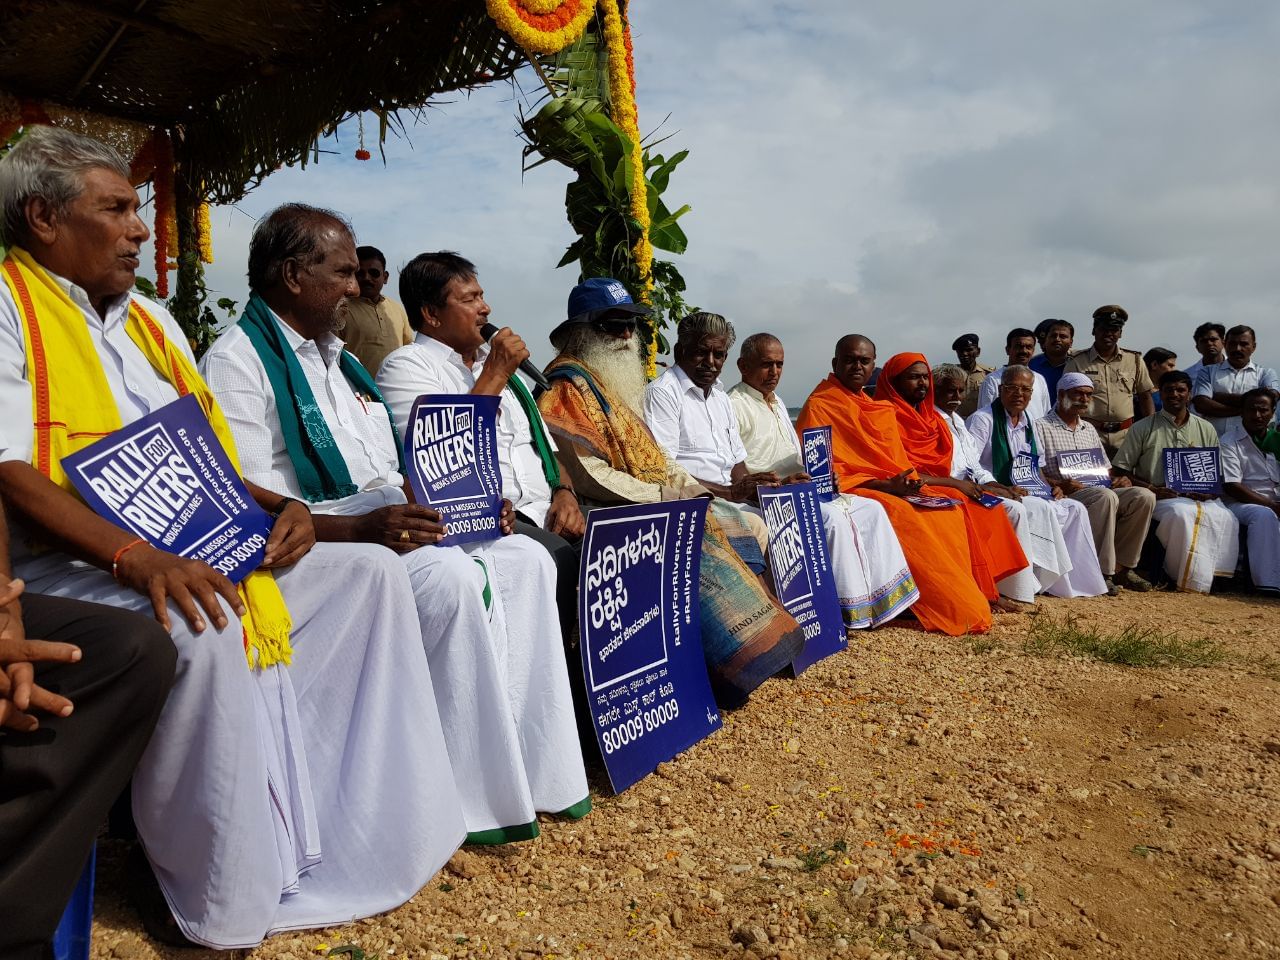 Farmers-meet-event-at-Mysuru-for-Rally-for-Rivers-5